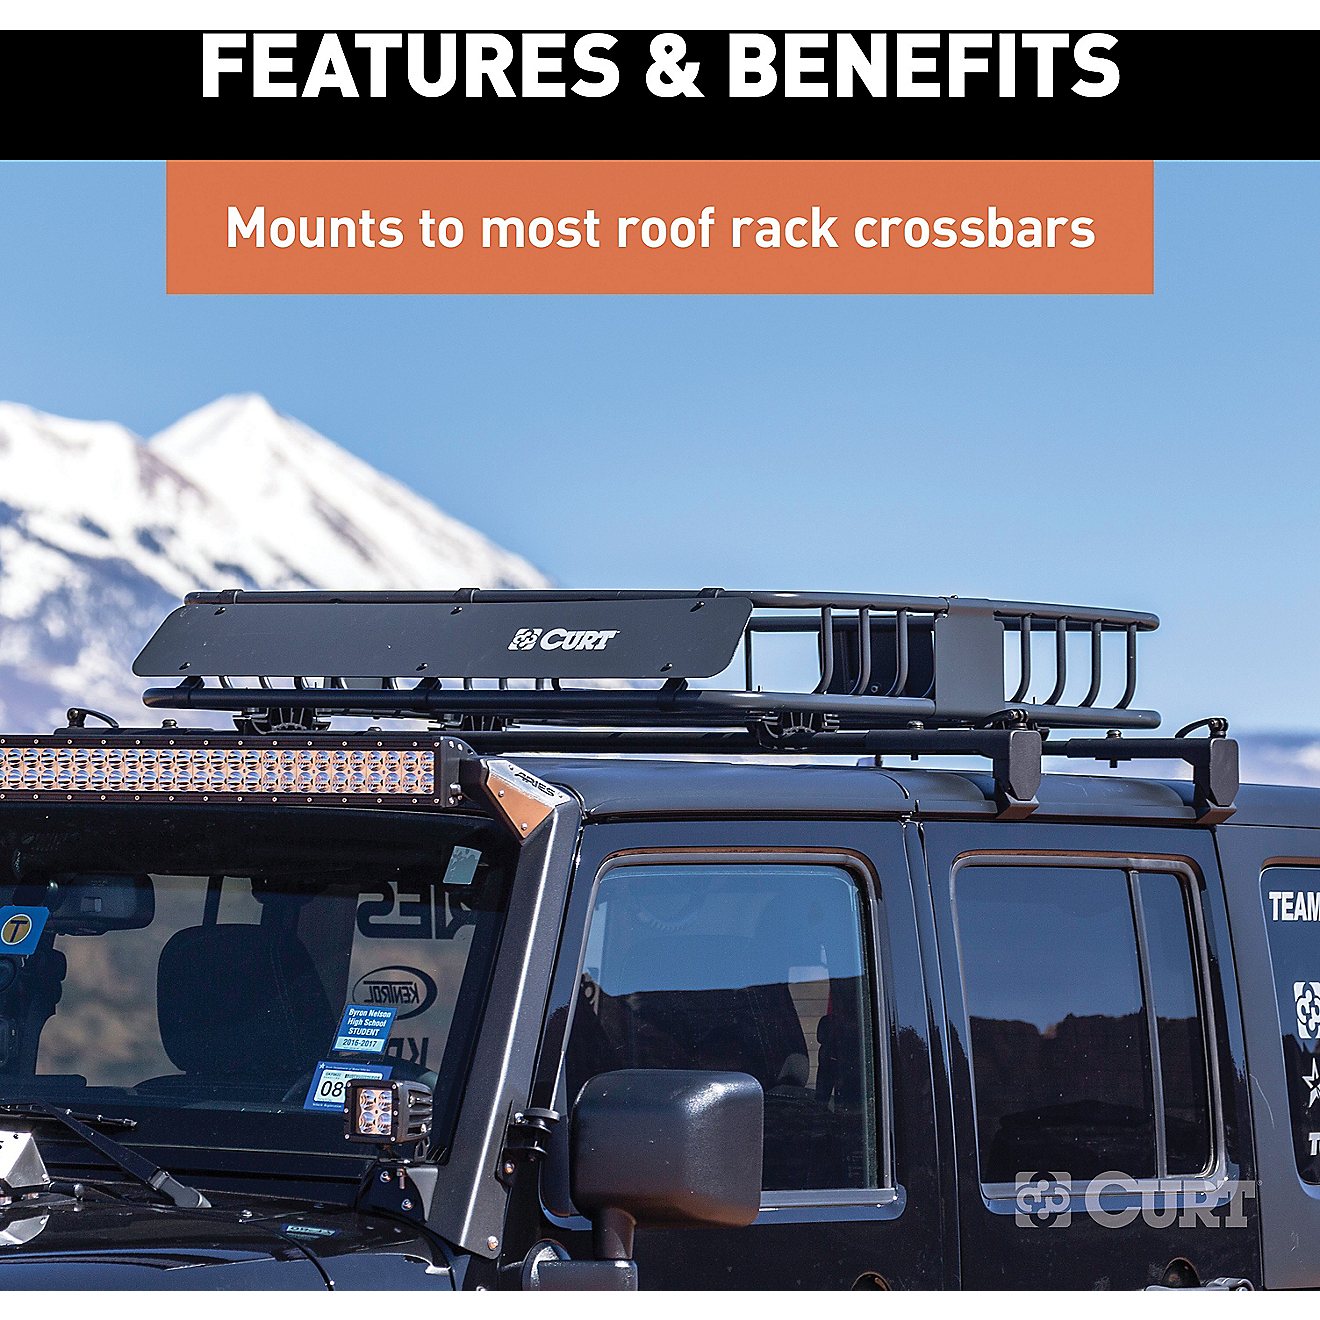 CURT 18115 Roof Rack Rooftop Cargo Carrier 41-1/2 x 37 x 4 41-1/2-Inch x 37 x 4-Inch